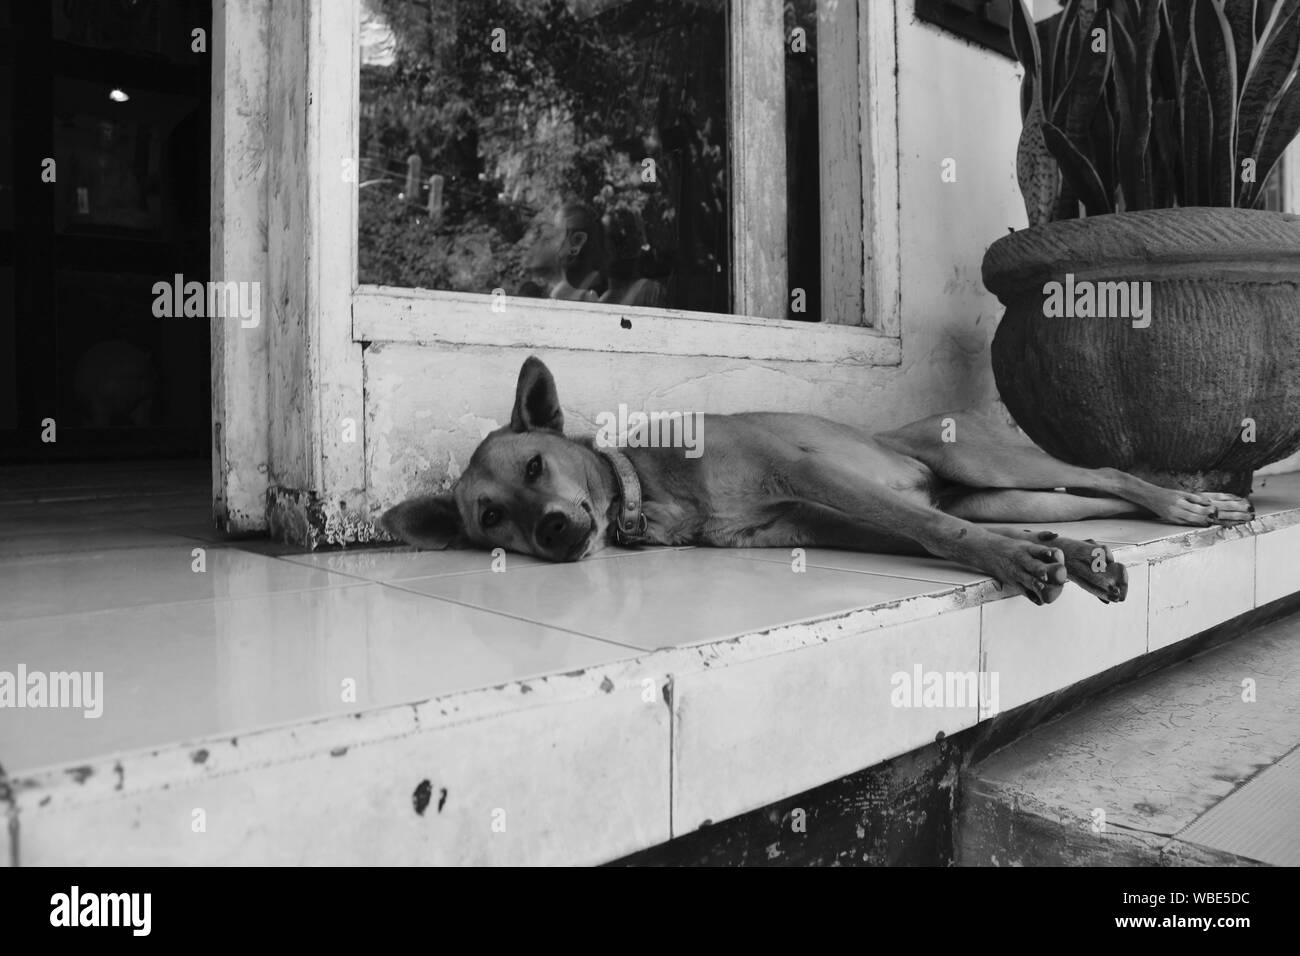 tired dog sleeping on whit tiles porch in front of window of a shop with plant pot Stock Photo